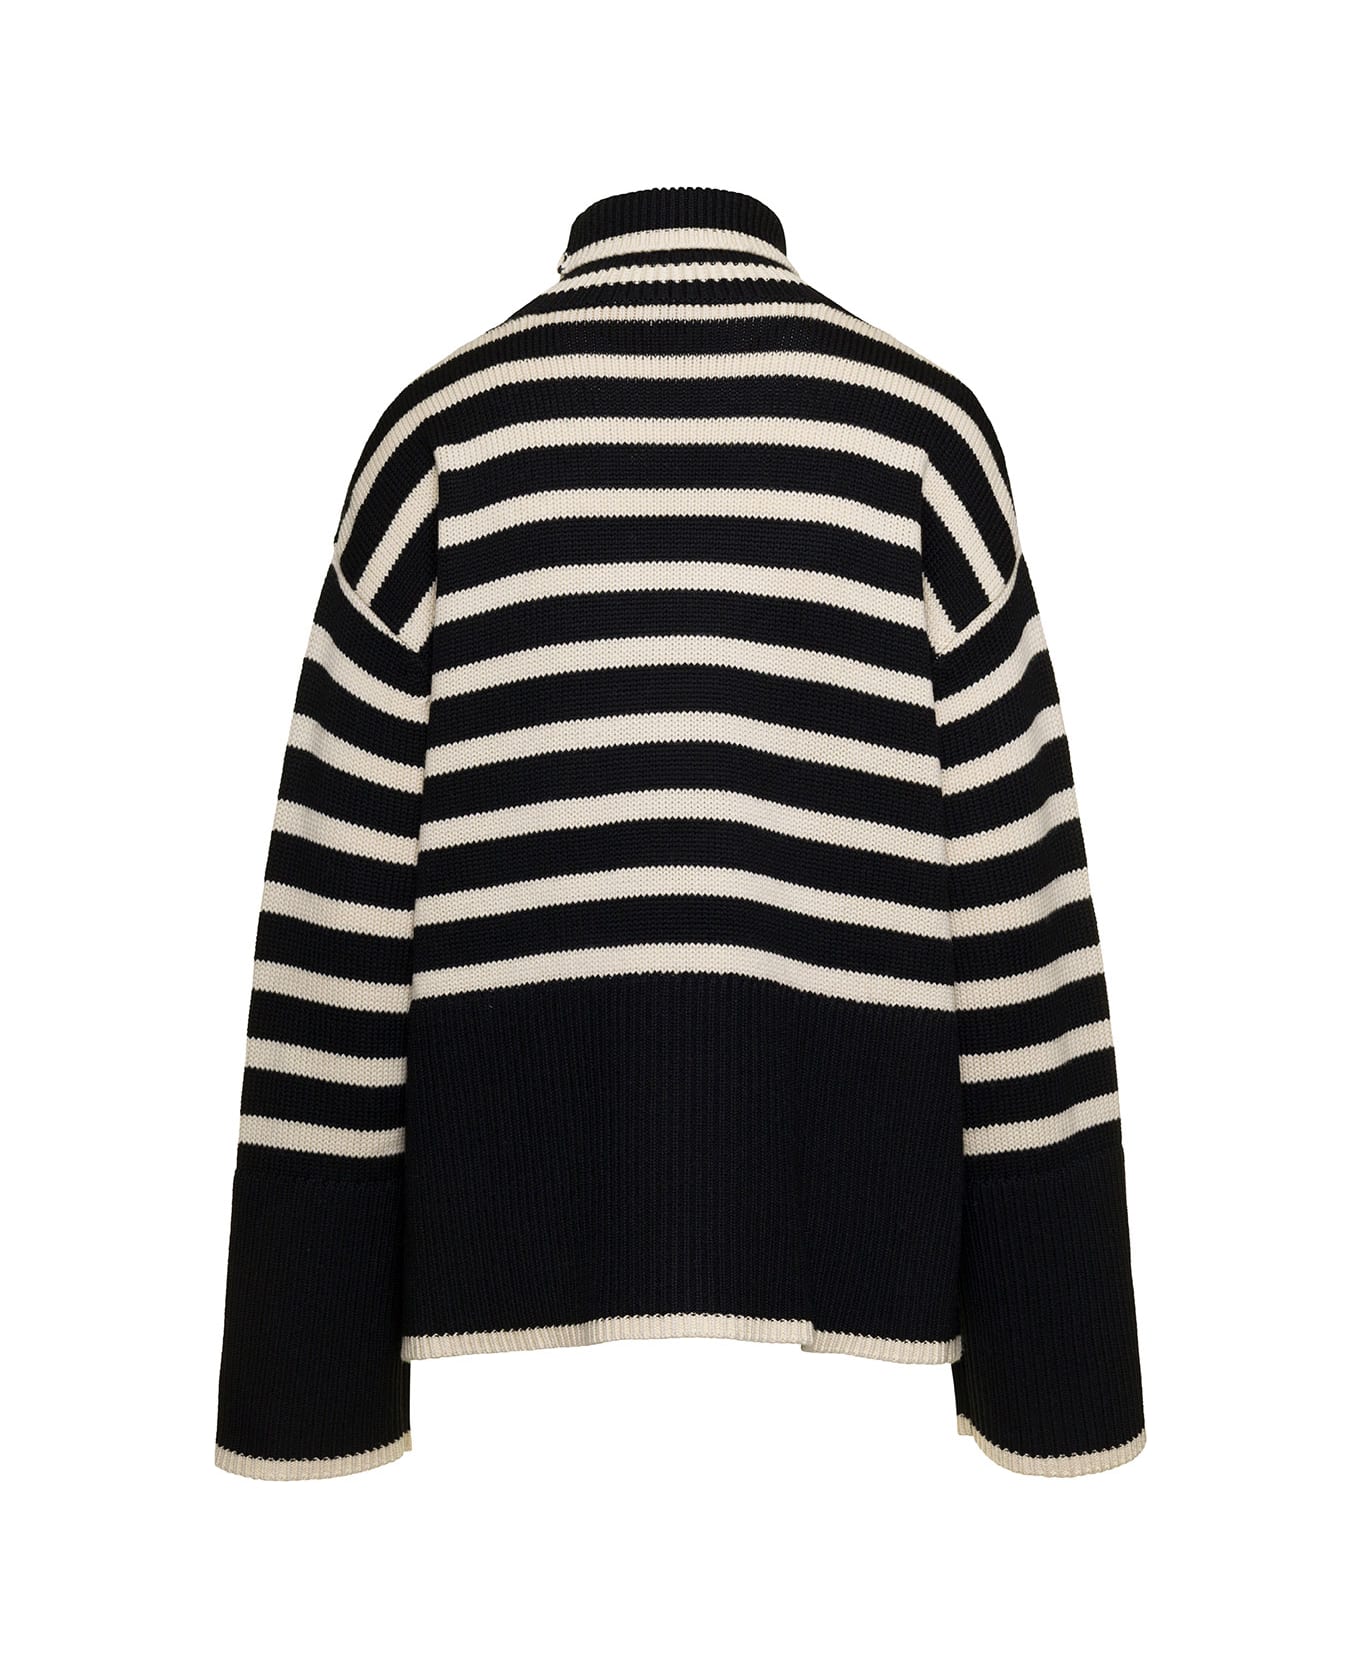 Totême Black And White Sweater With Striped Motif In Wool Woman - Black